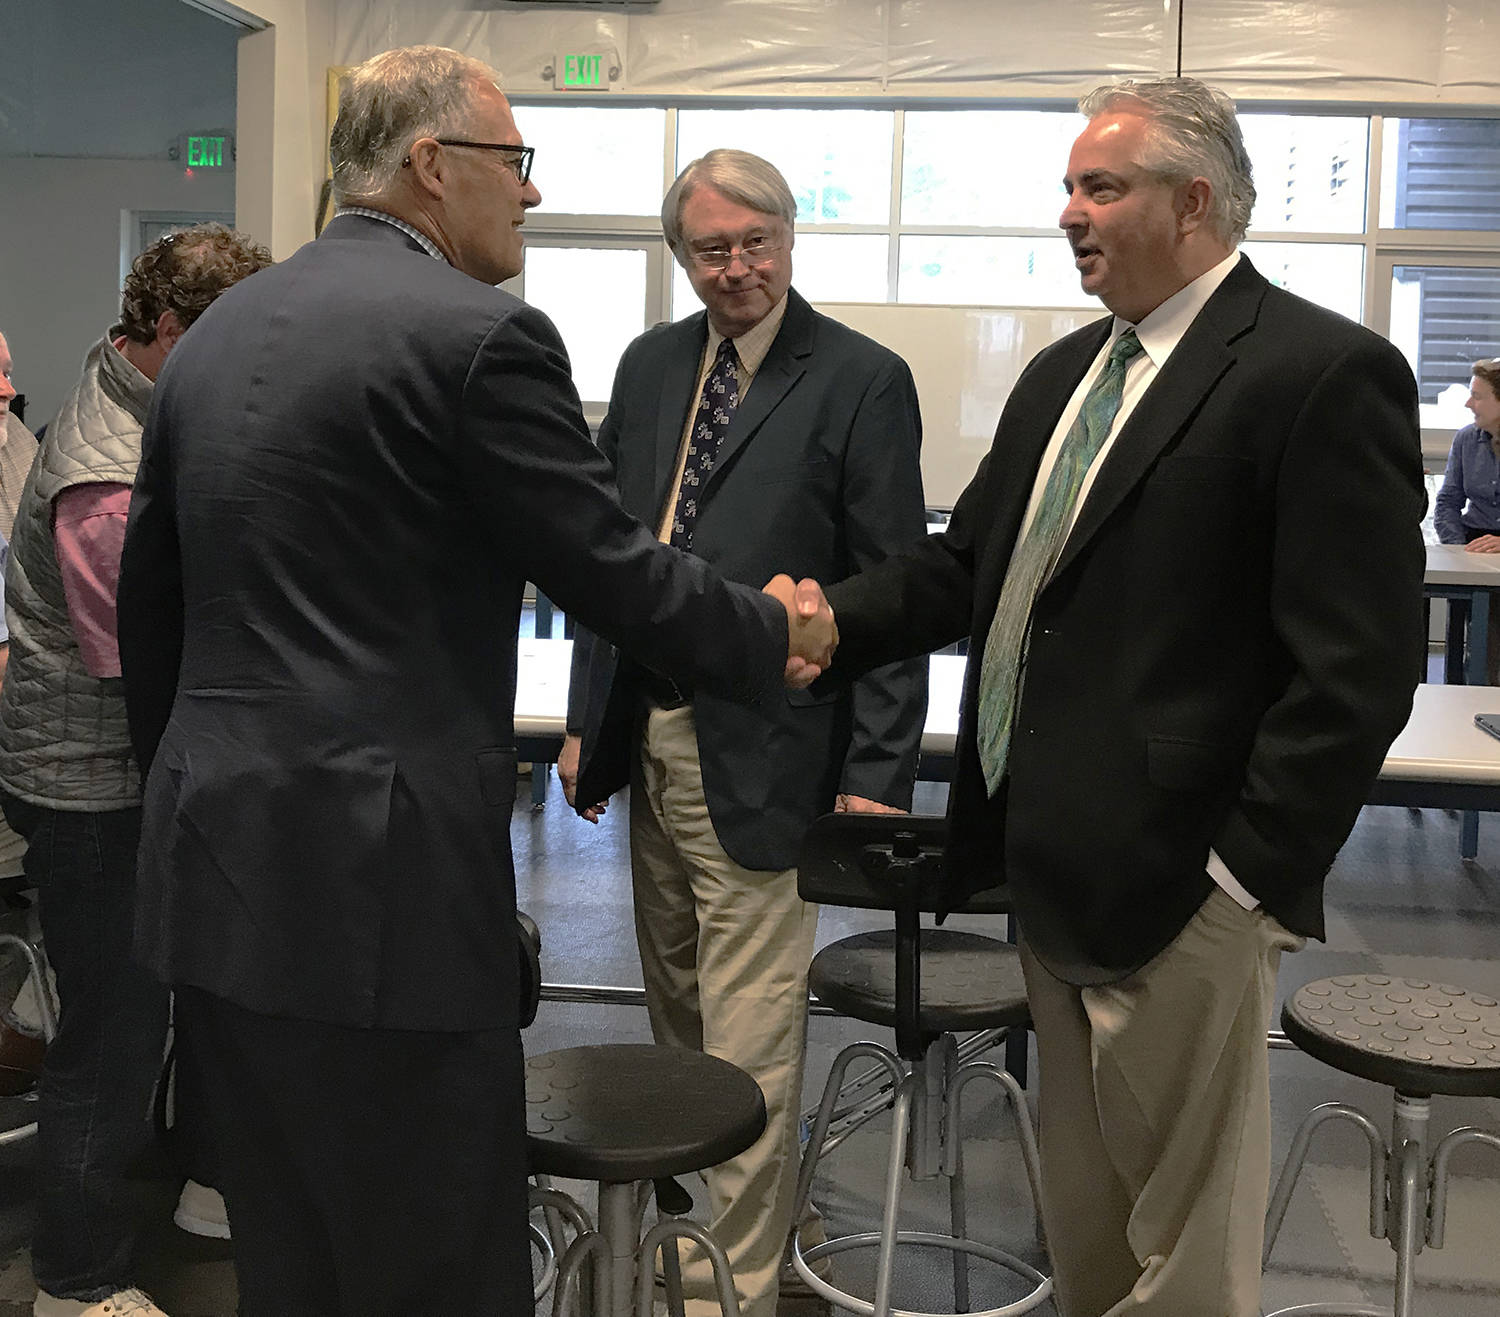 Contributed photo/OPALCO                                OPALCO General Manager Foster Hildreth and Board President Vince Dauciunas meet with Gov. Inslee.